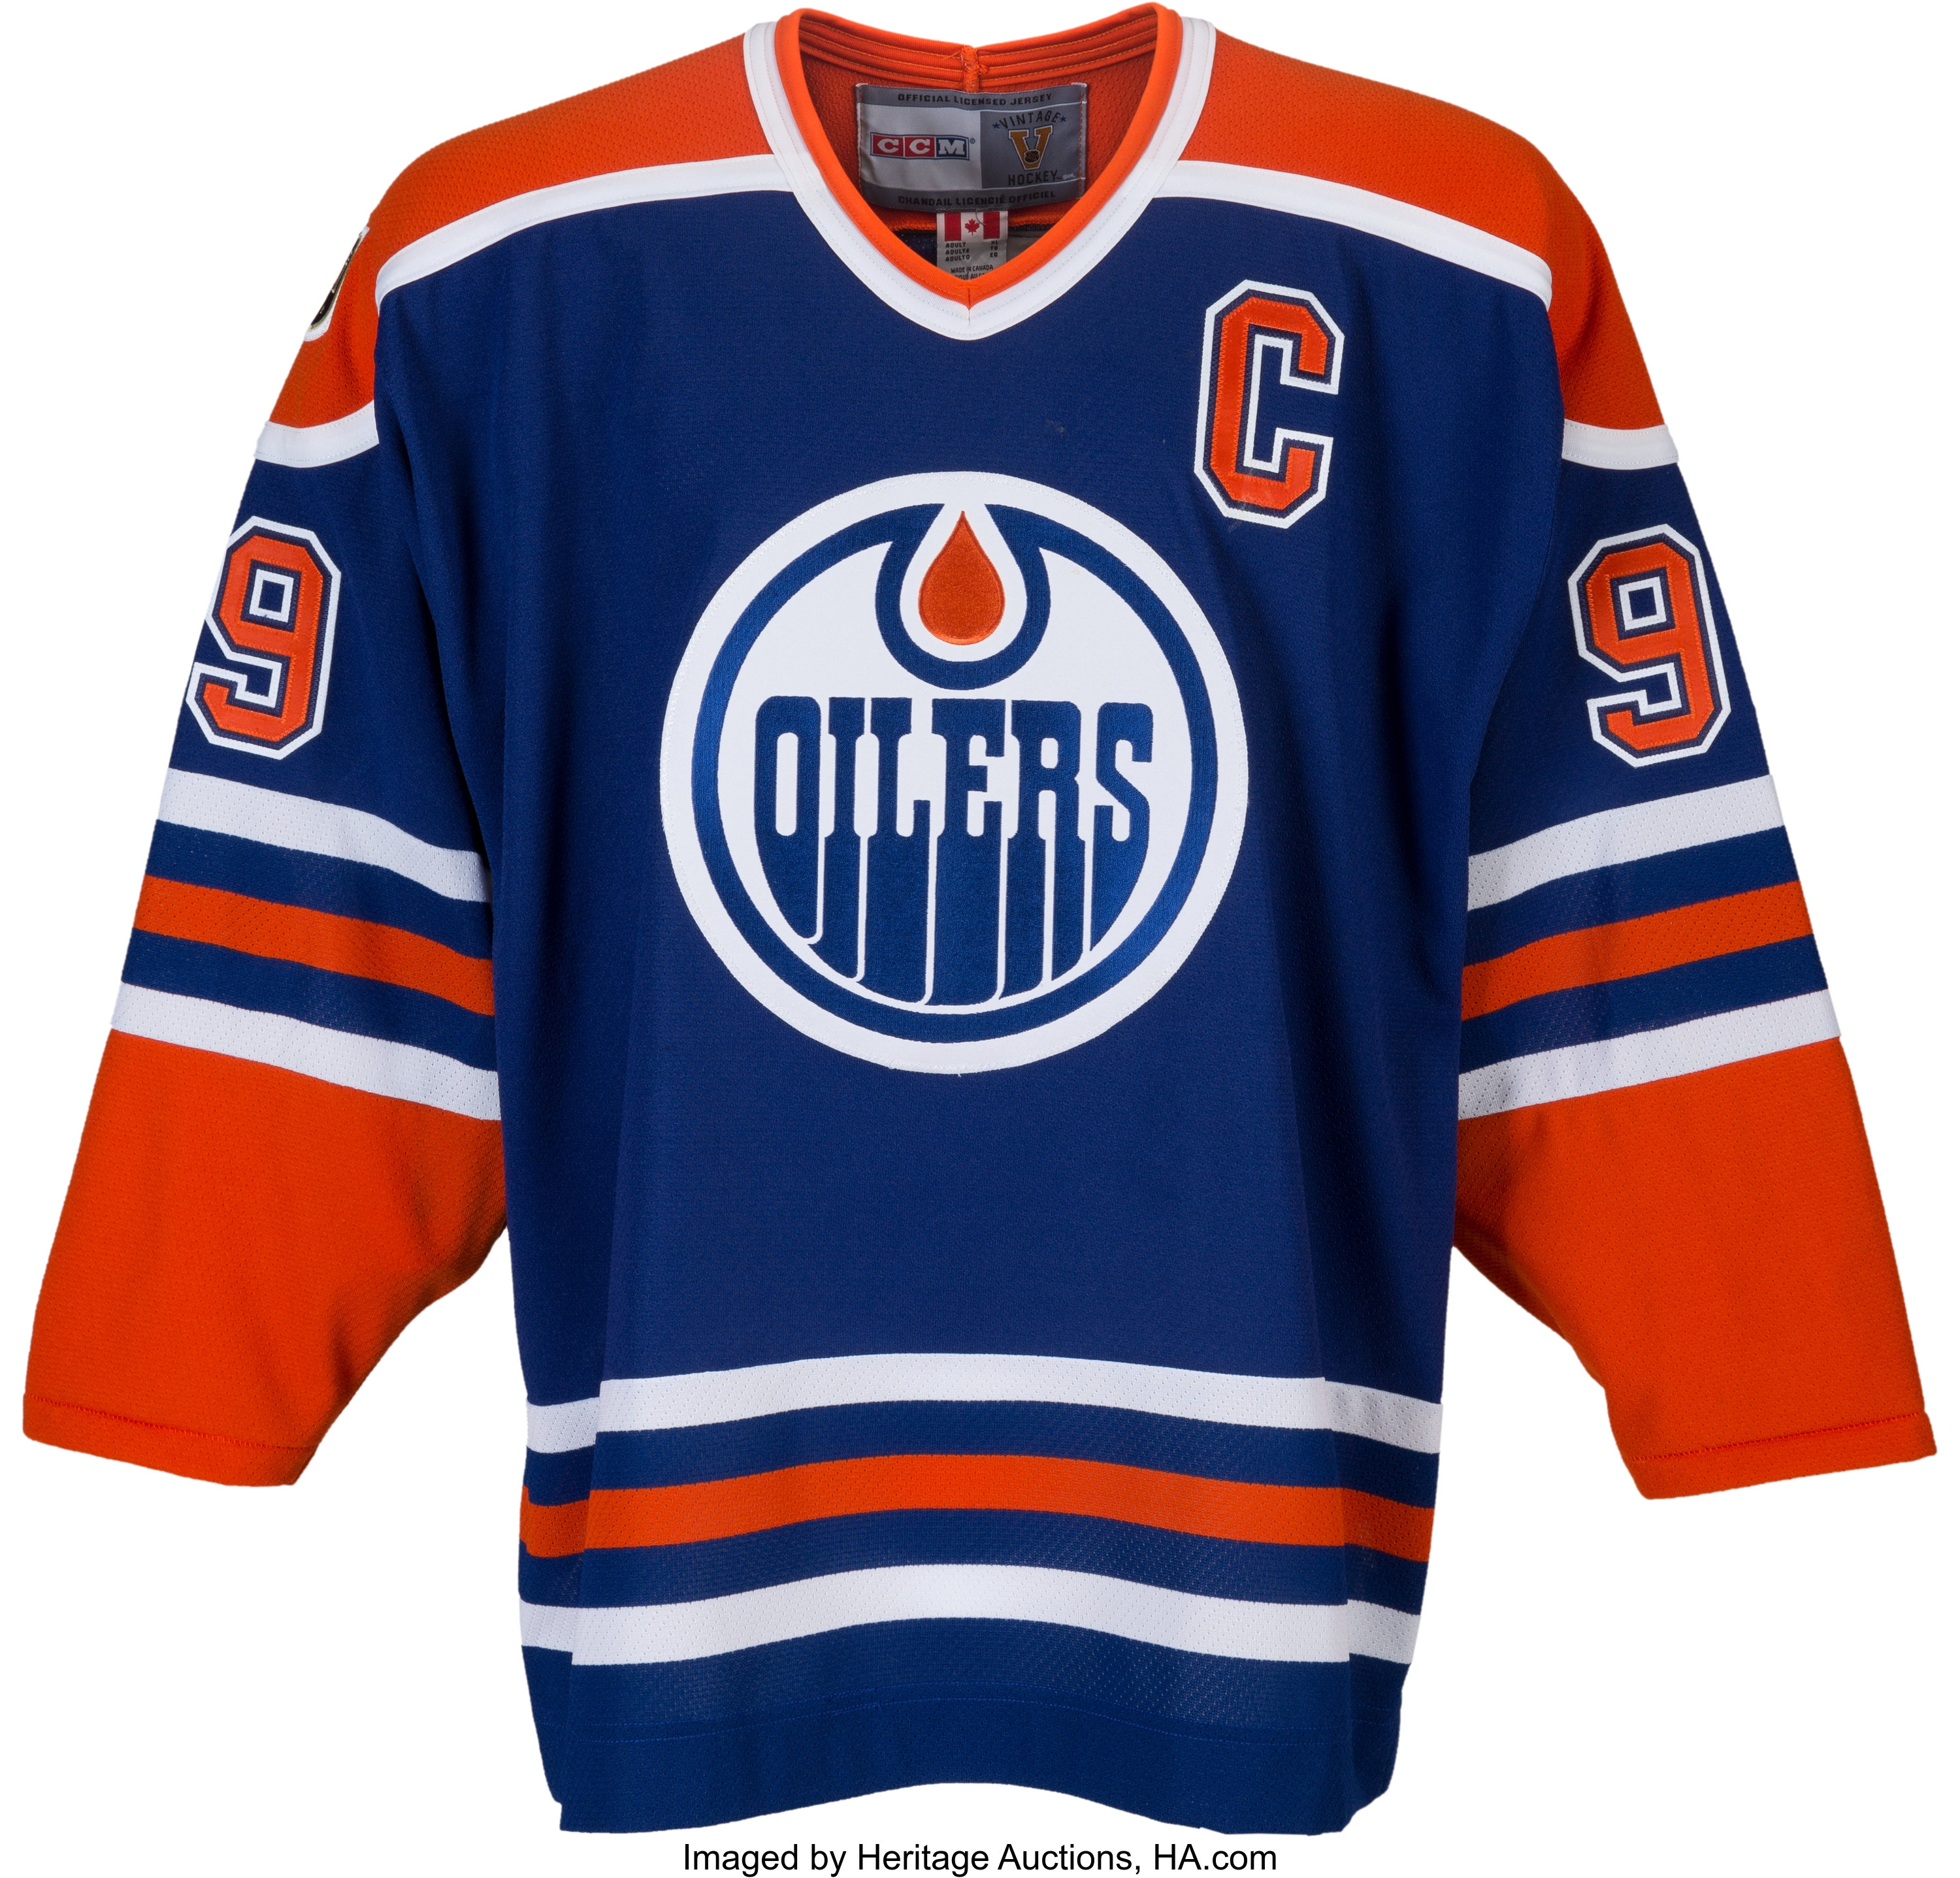 An Early Look At The Heritage Classic Jerseys For The Edmonton